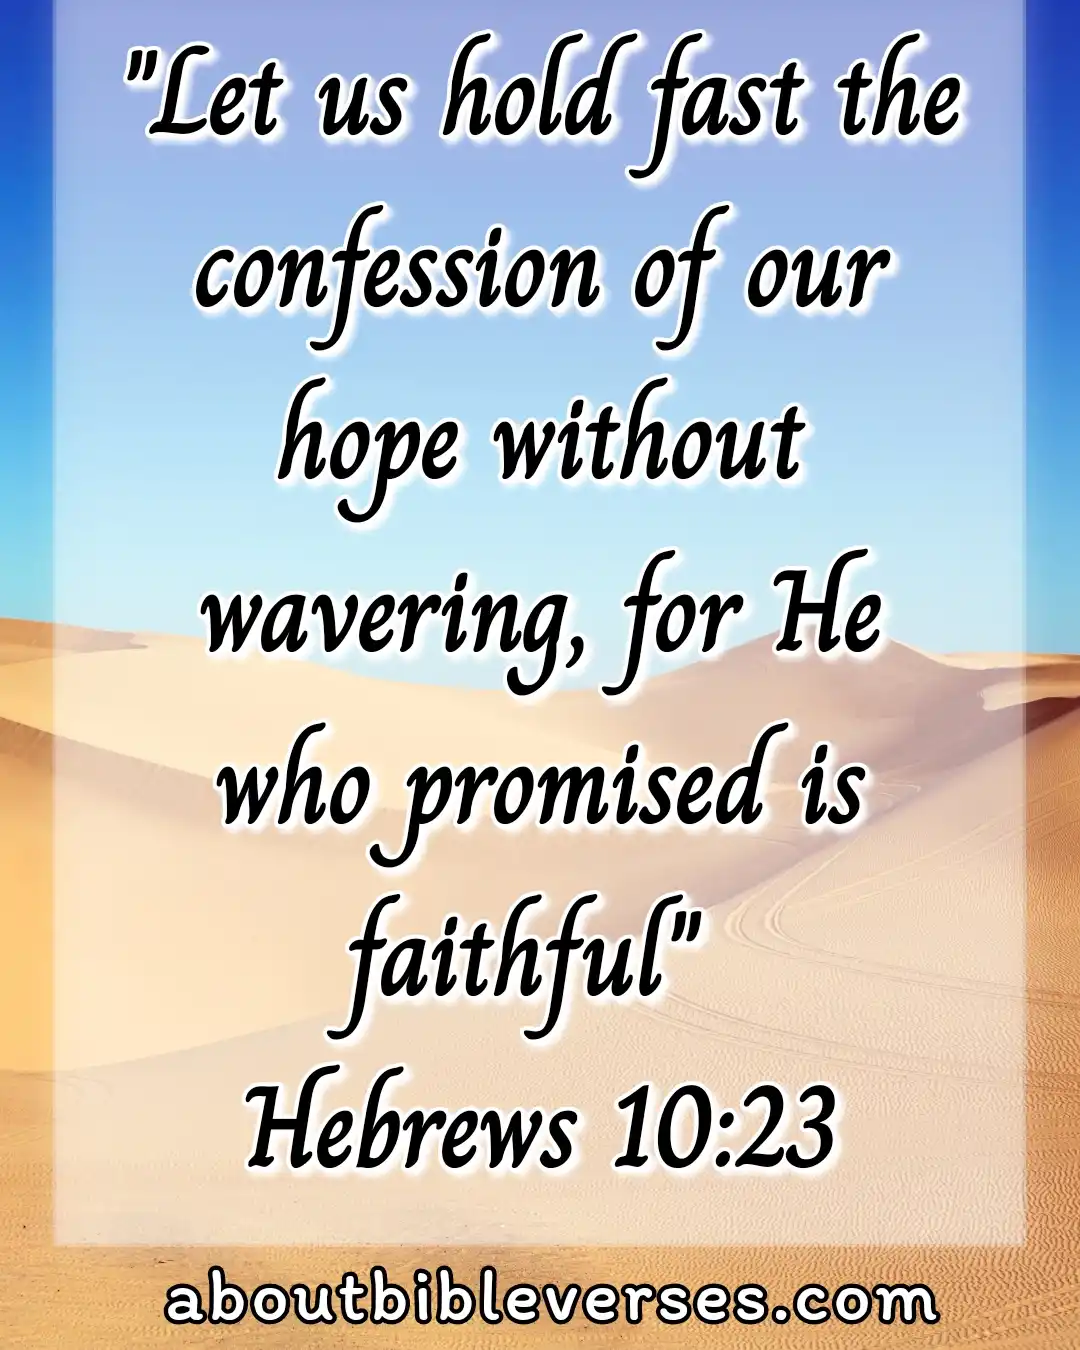 Bible Verses About Trusting God In Difficult Times (Hebrews 10:23)